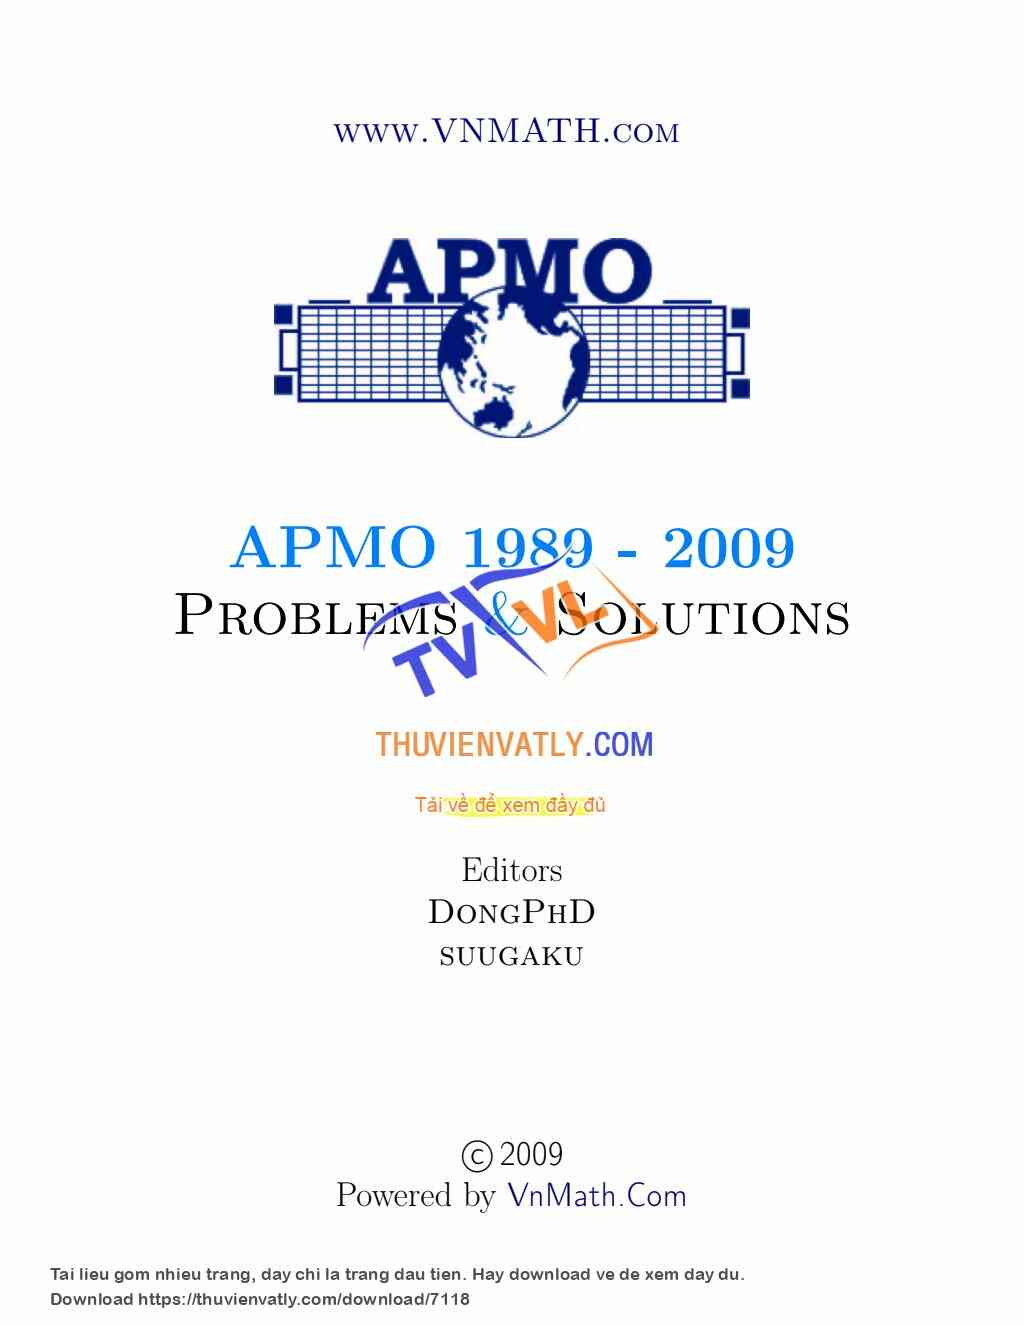 APMO 1989 - 2009: Problems and Solutions